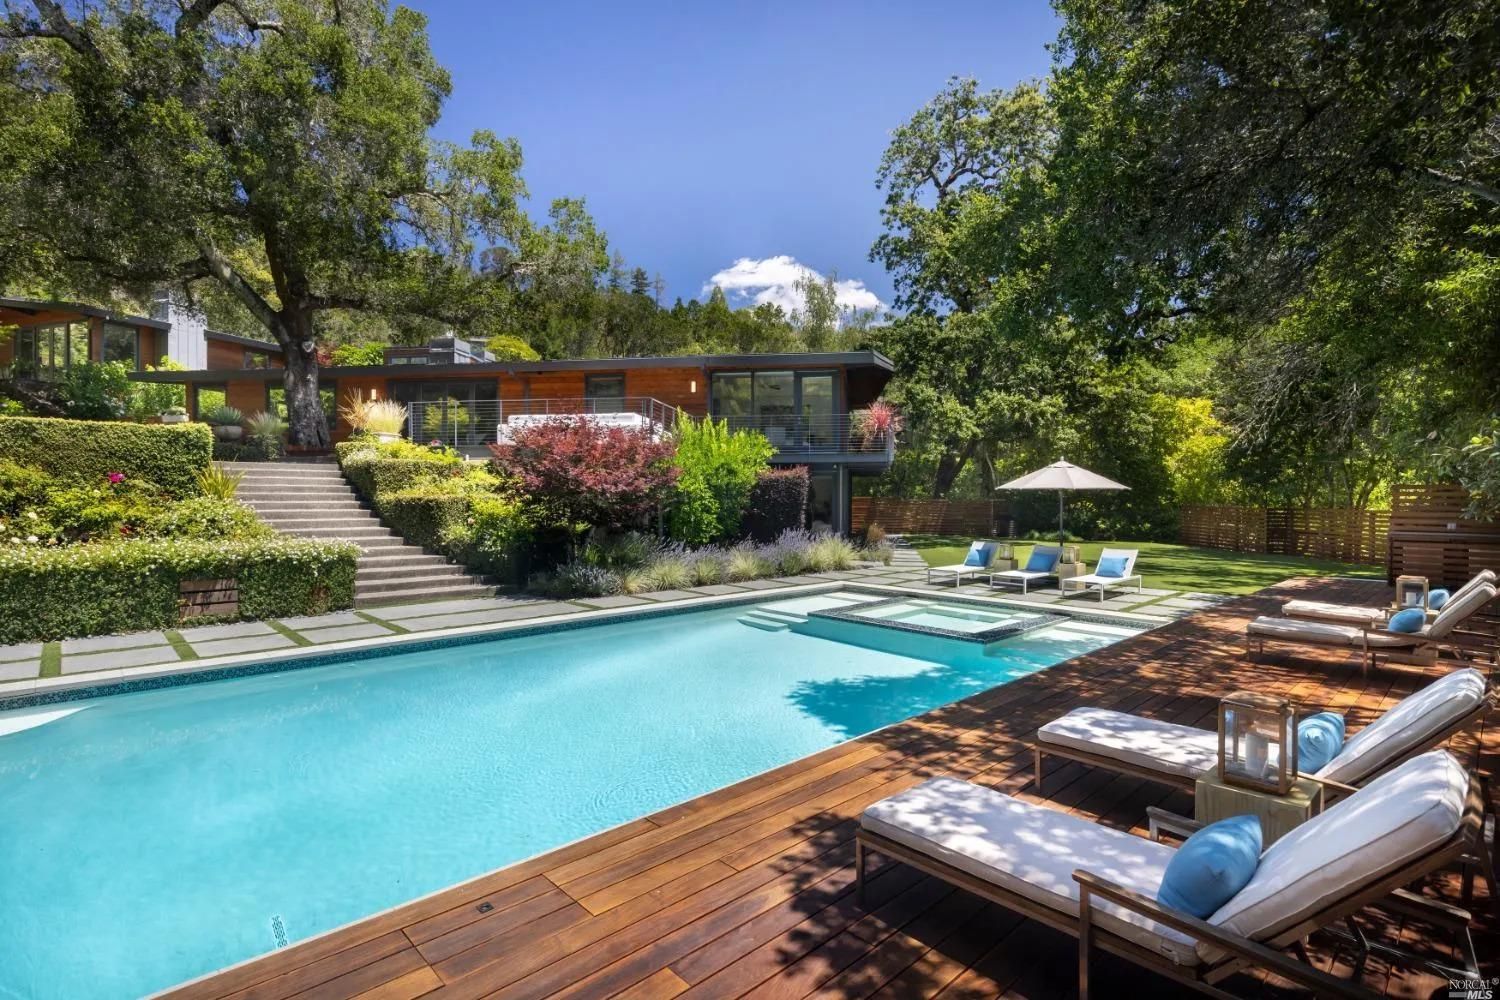 Spacious Kentfield home with cozy rooms + luxe outdoor spaces asks $8.75 million